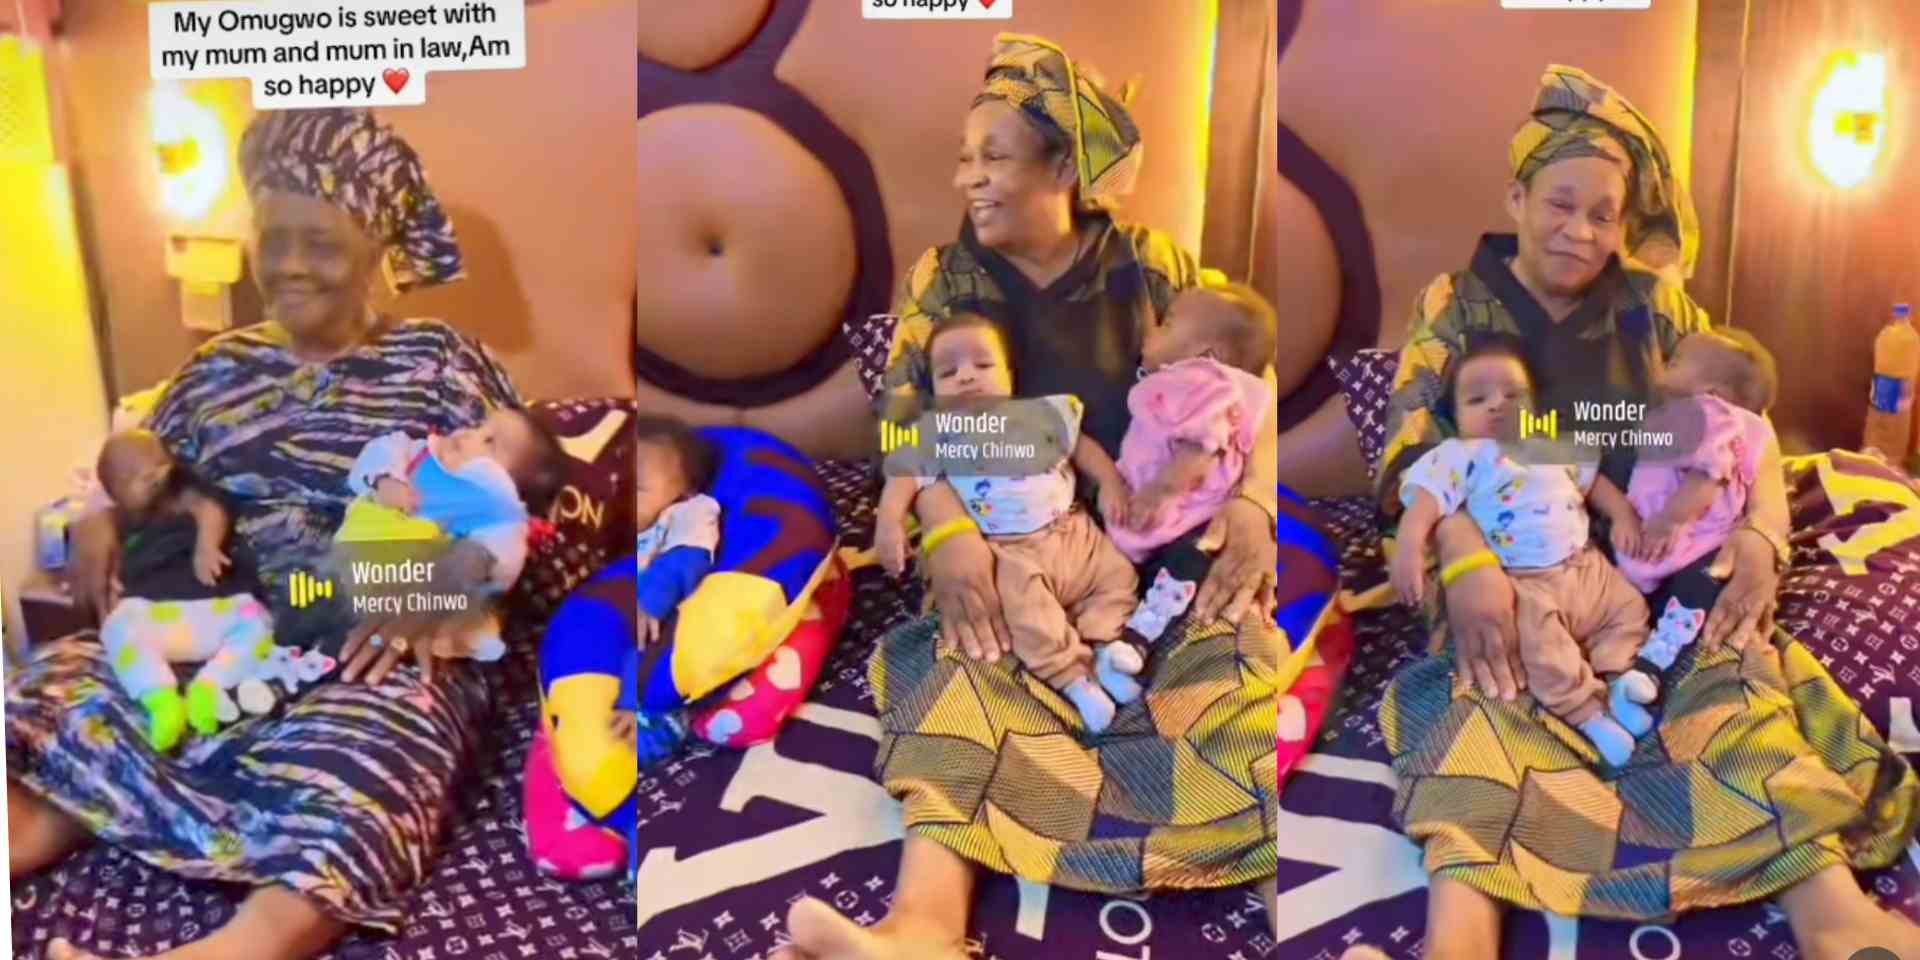 Mother Of Quintuplets Overjoyed As Her Mom And Mom In Law Show Up For